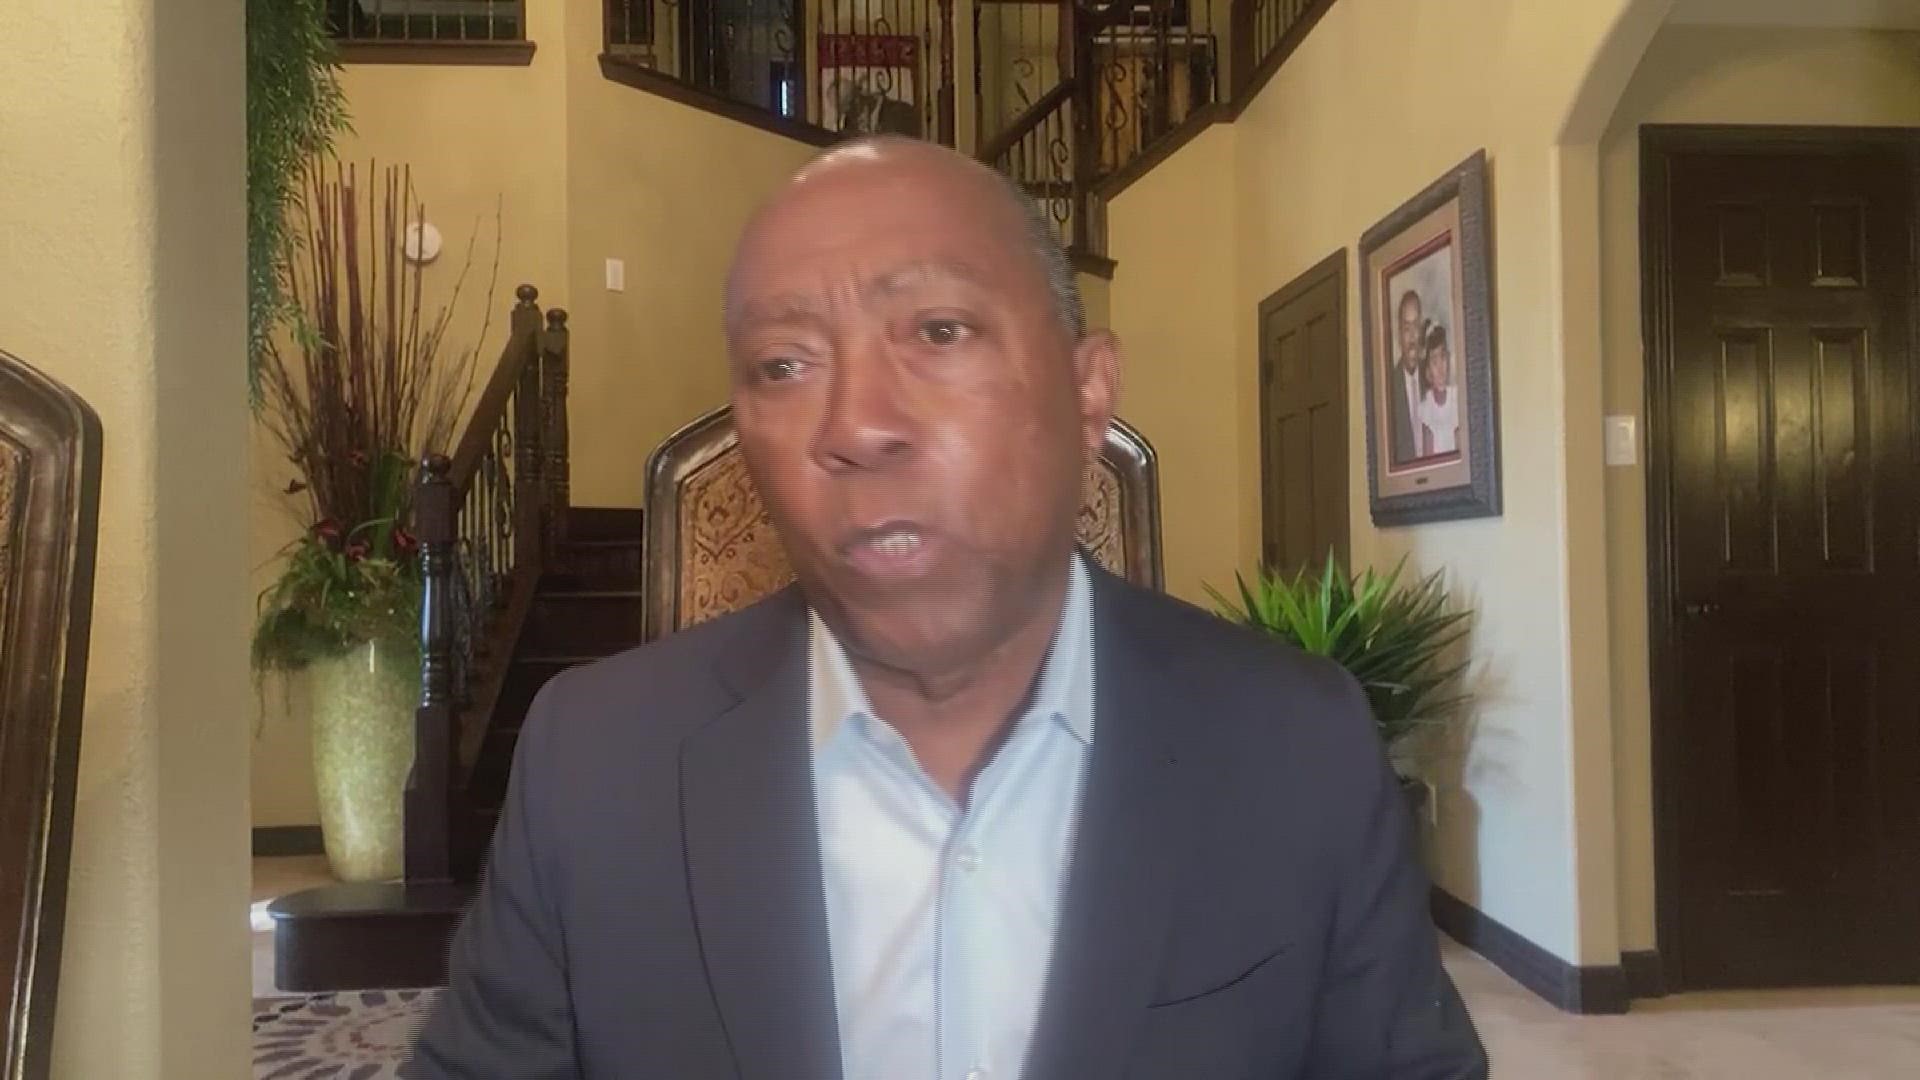 This video is from an interview Mayor Turner did with CNN on Saturday, a day after eight people died at Astroworld Festival